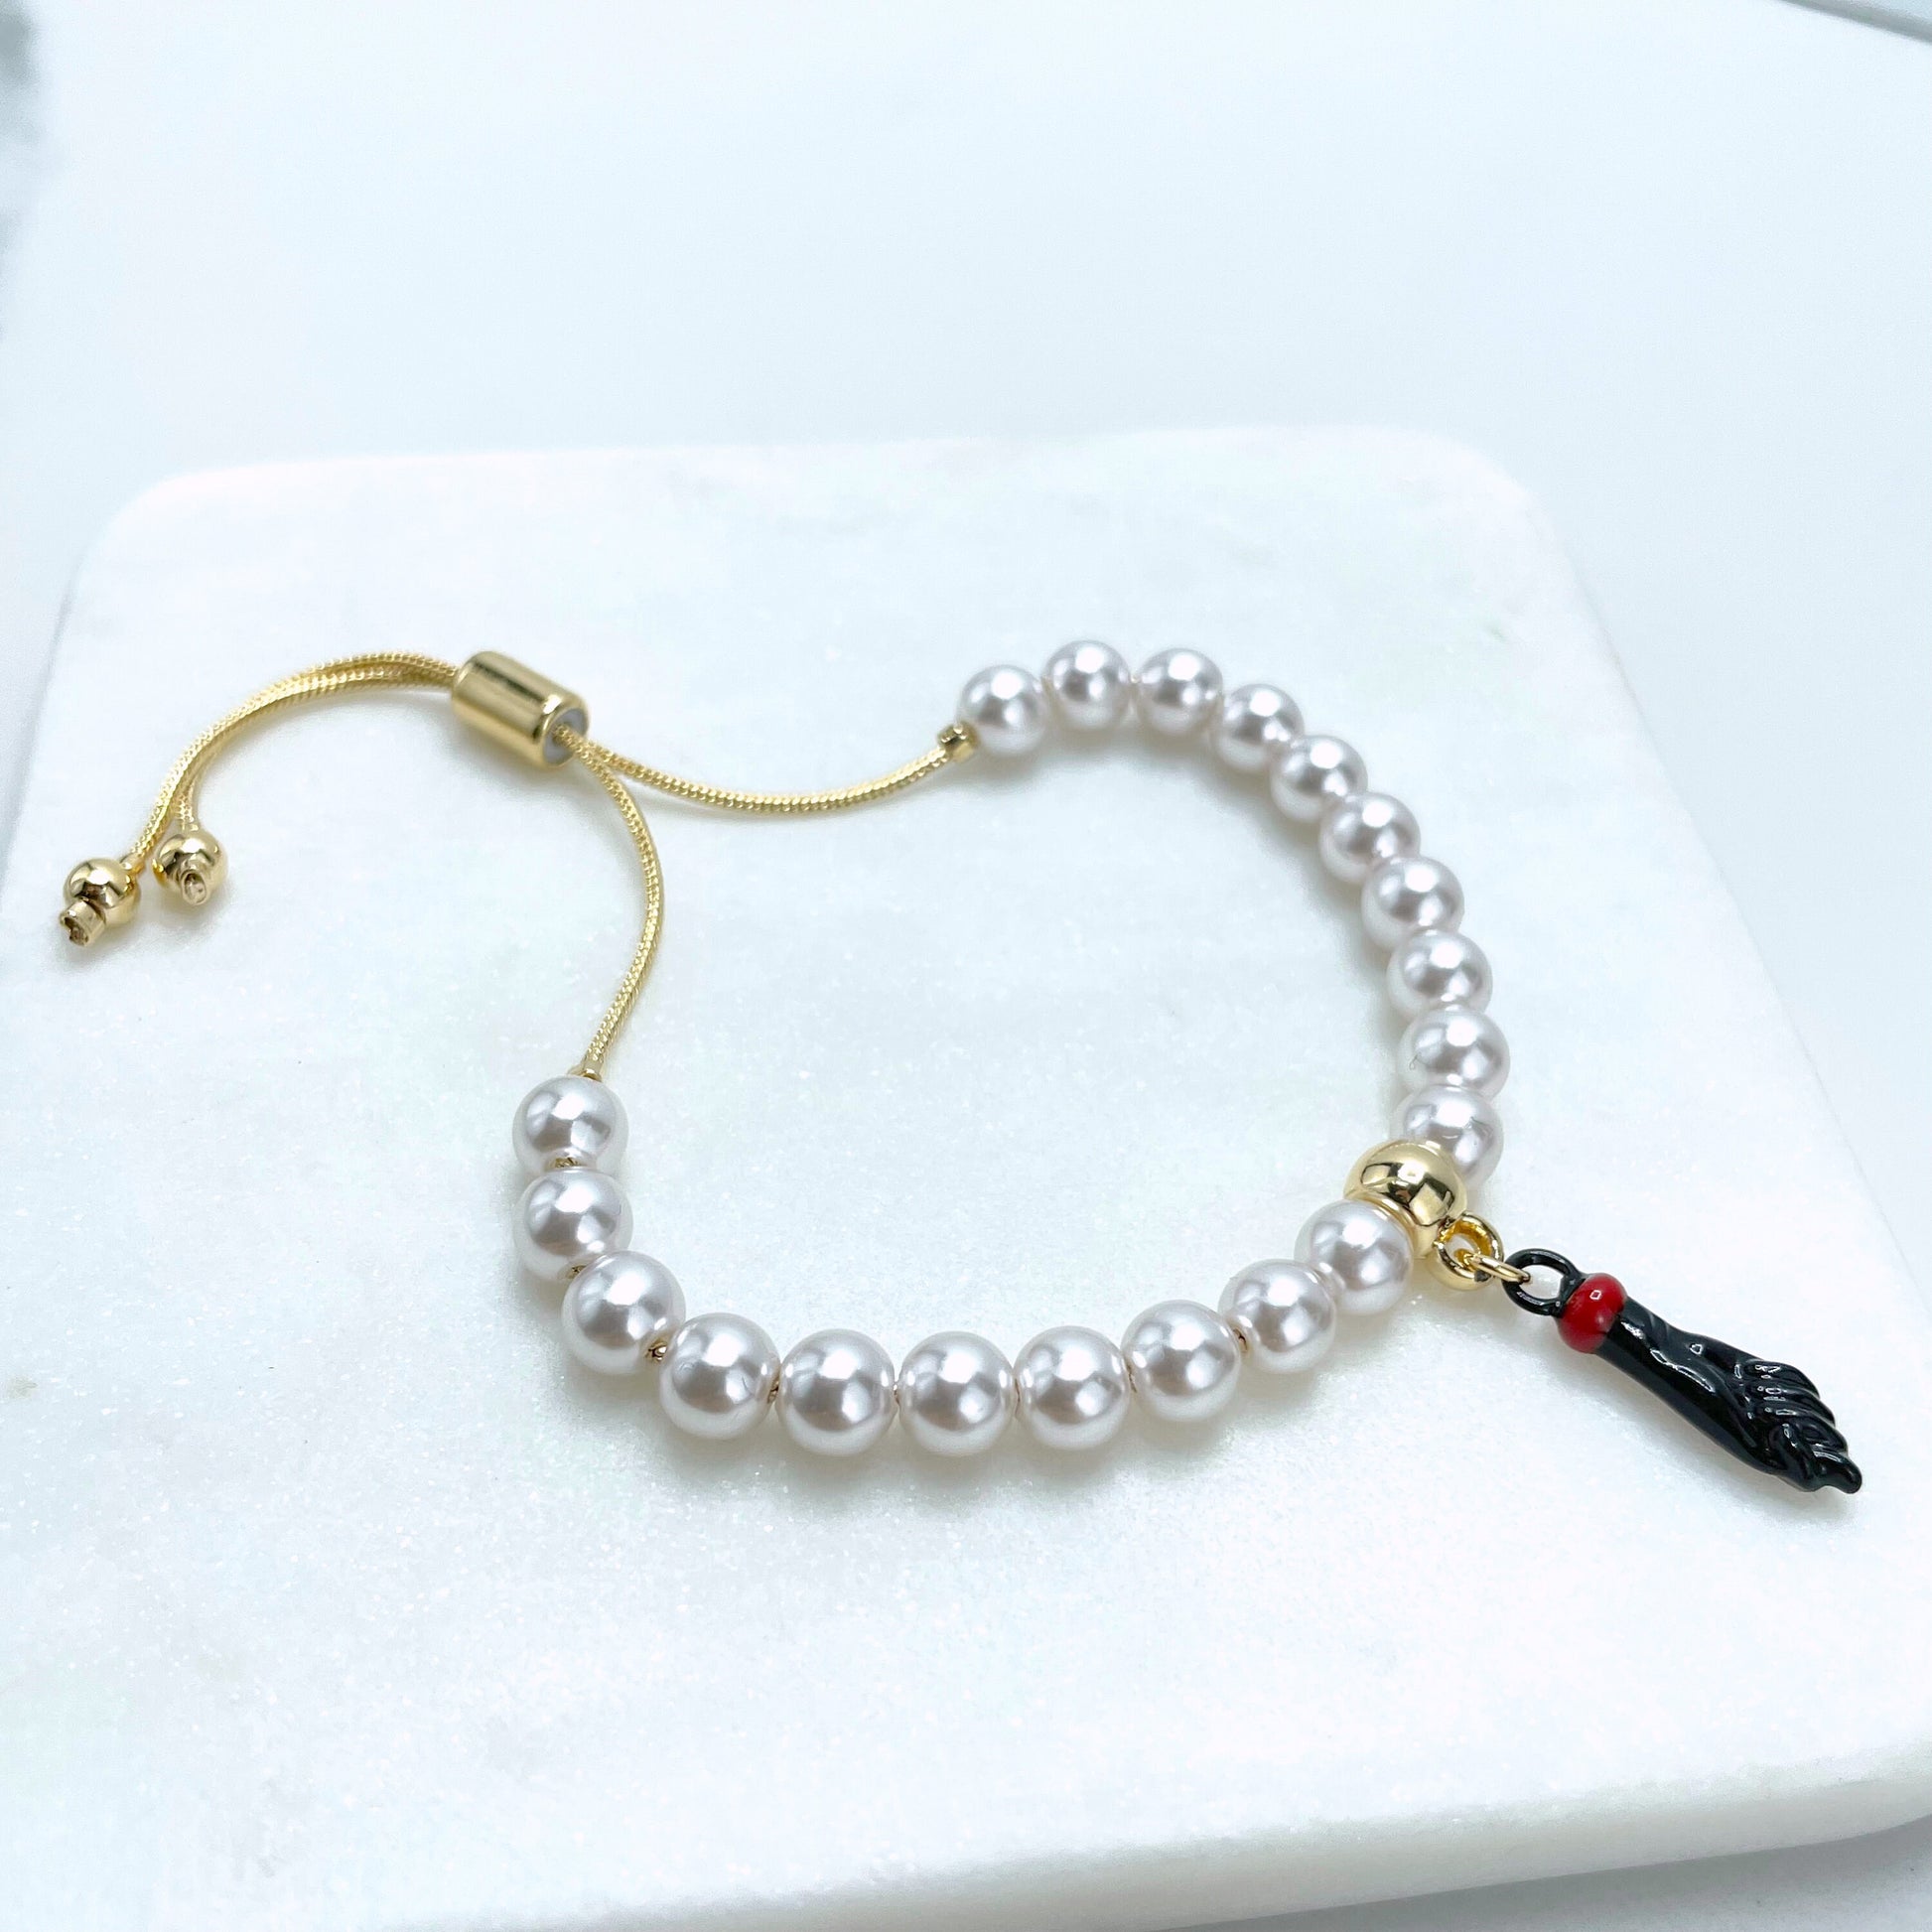 18k Gold Filled White Beads, Simulated Pearls Black Figa Hand Charm, Adjustable Bracelet, Protection Jewelry WholesaleJewelry Supplies